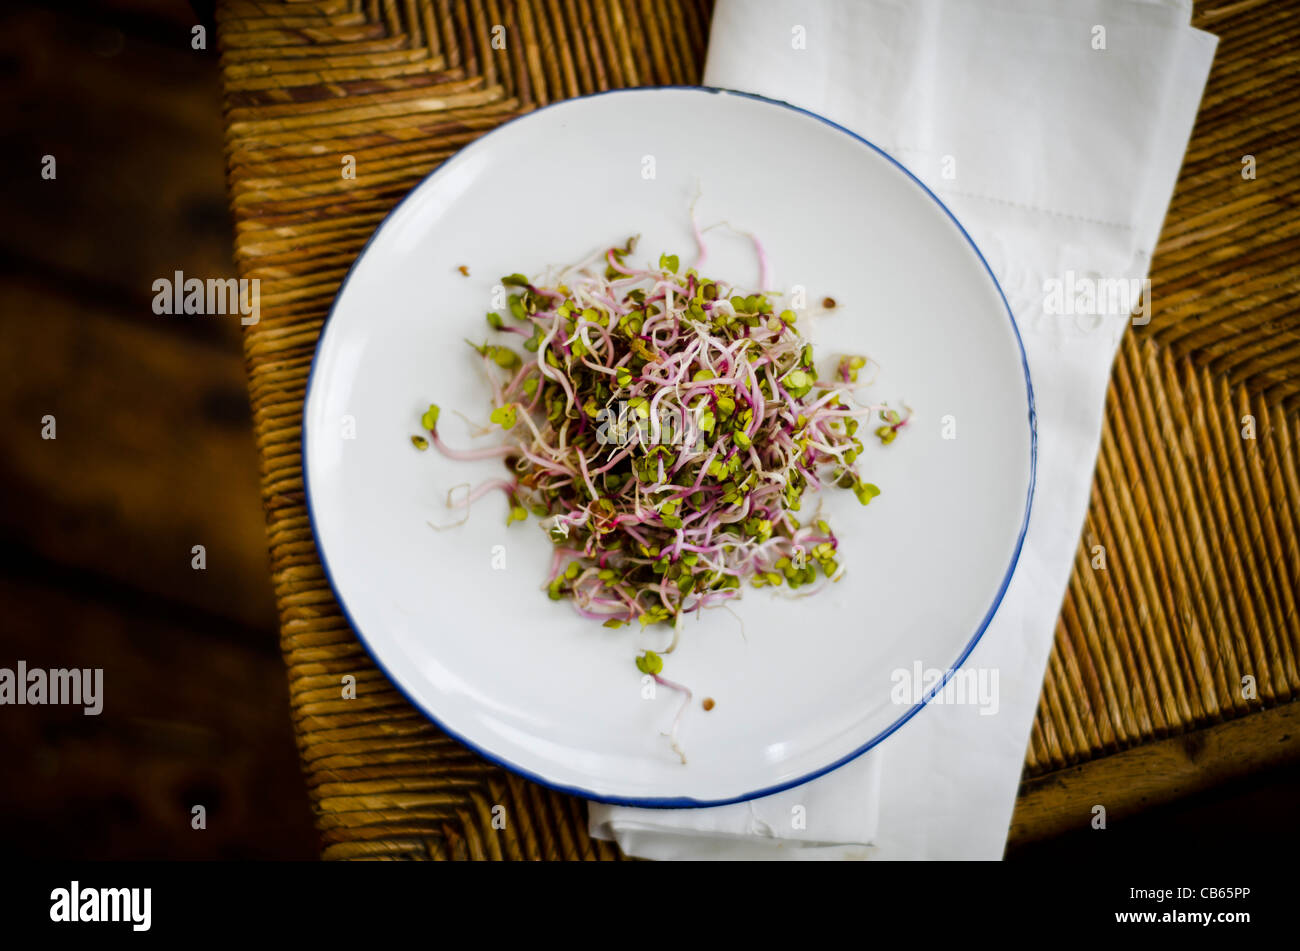 Simple salad made of China Rose Radish sprouting seeds, dressed with soy sauce and rice vinegar. Stock Photo